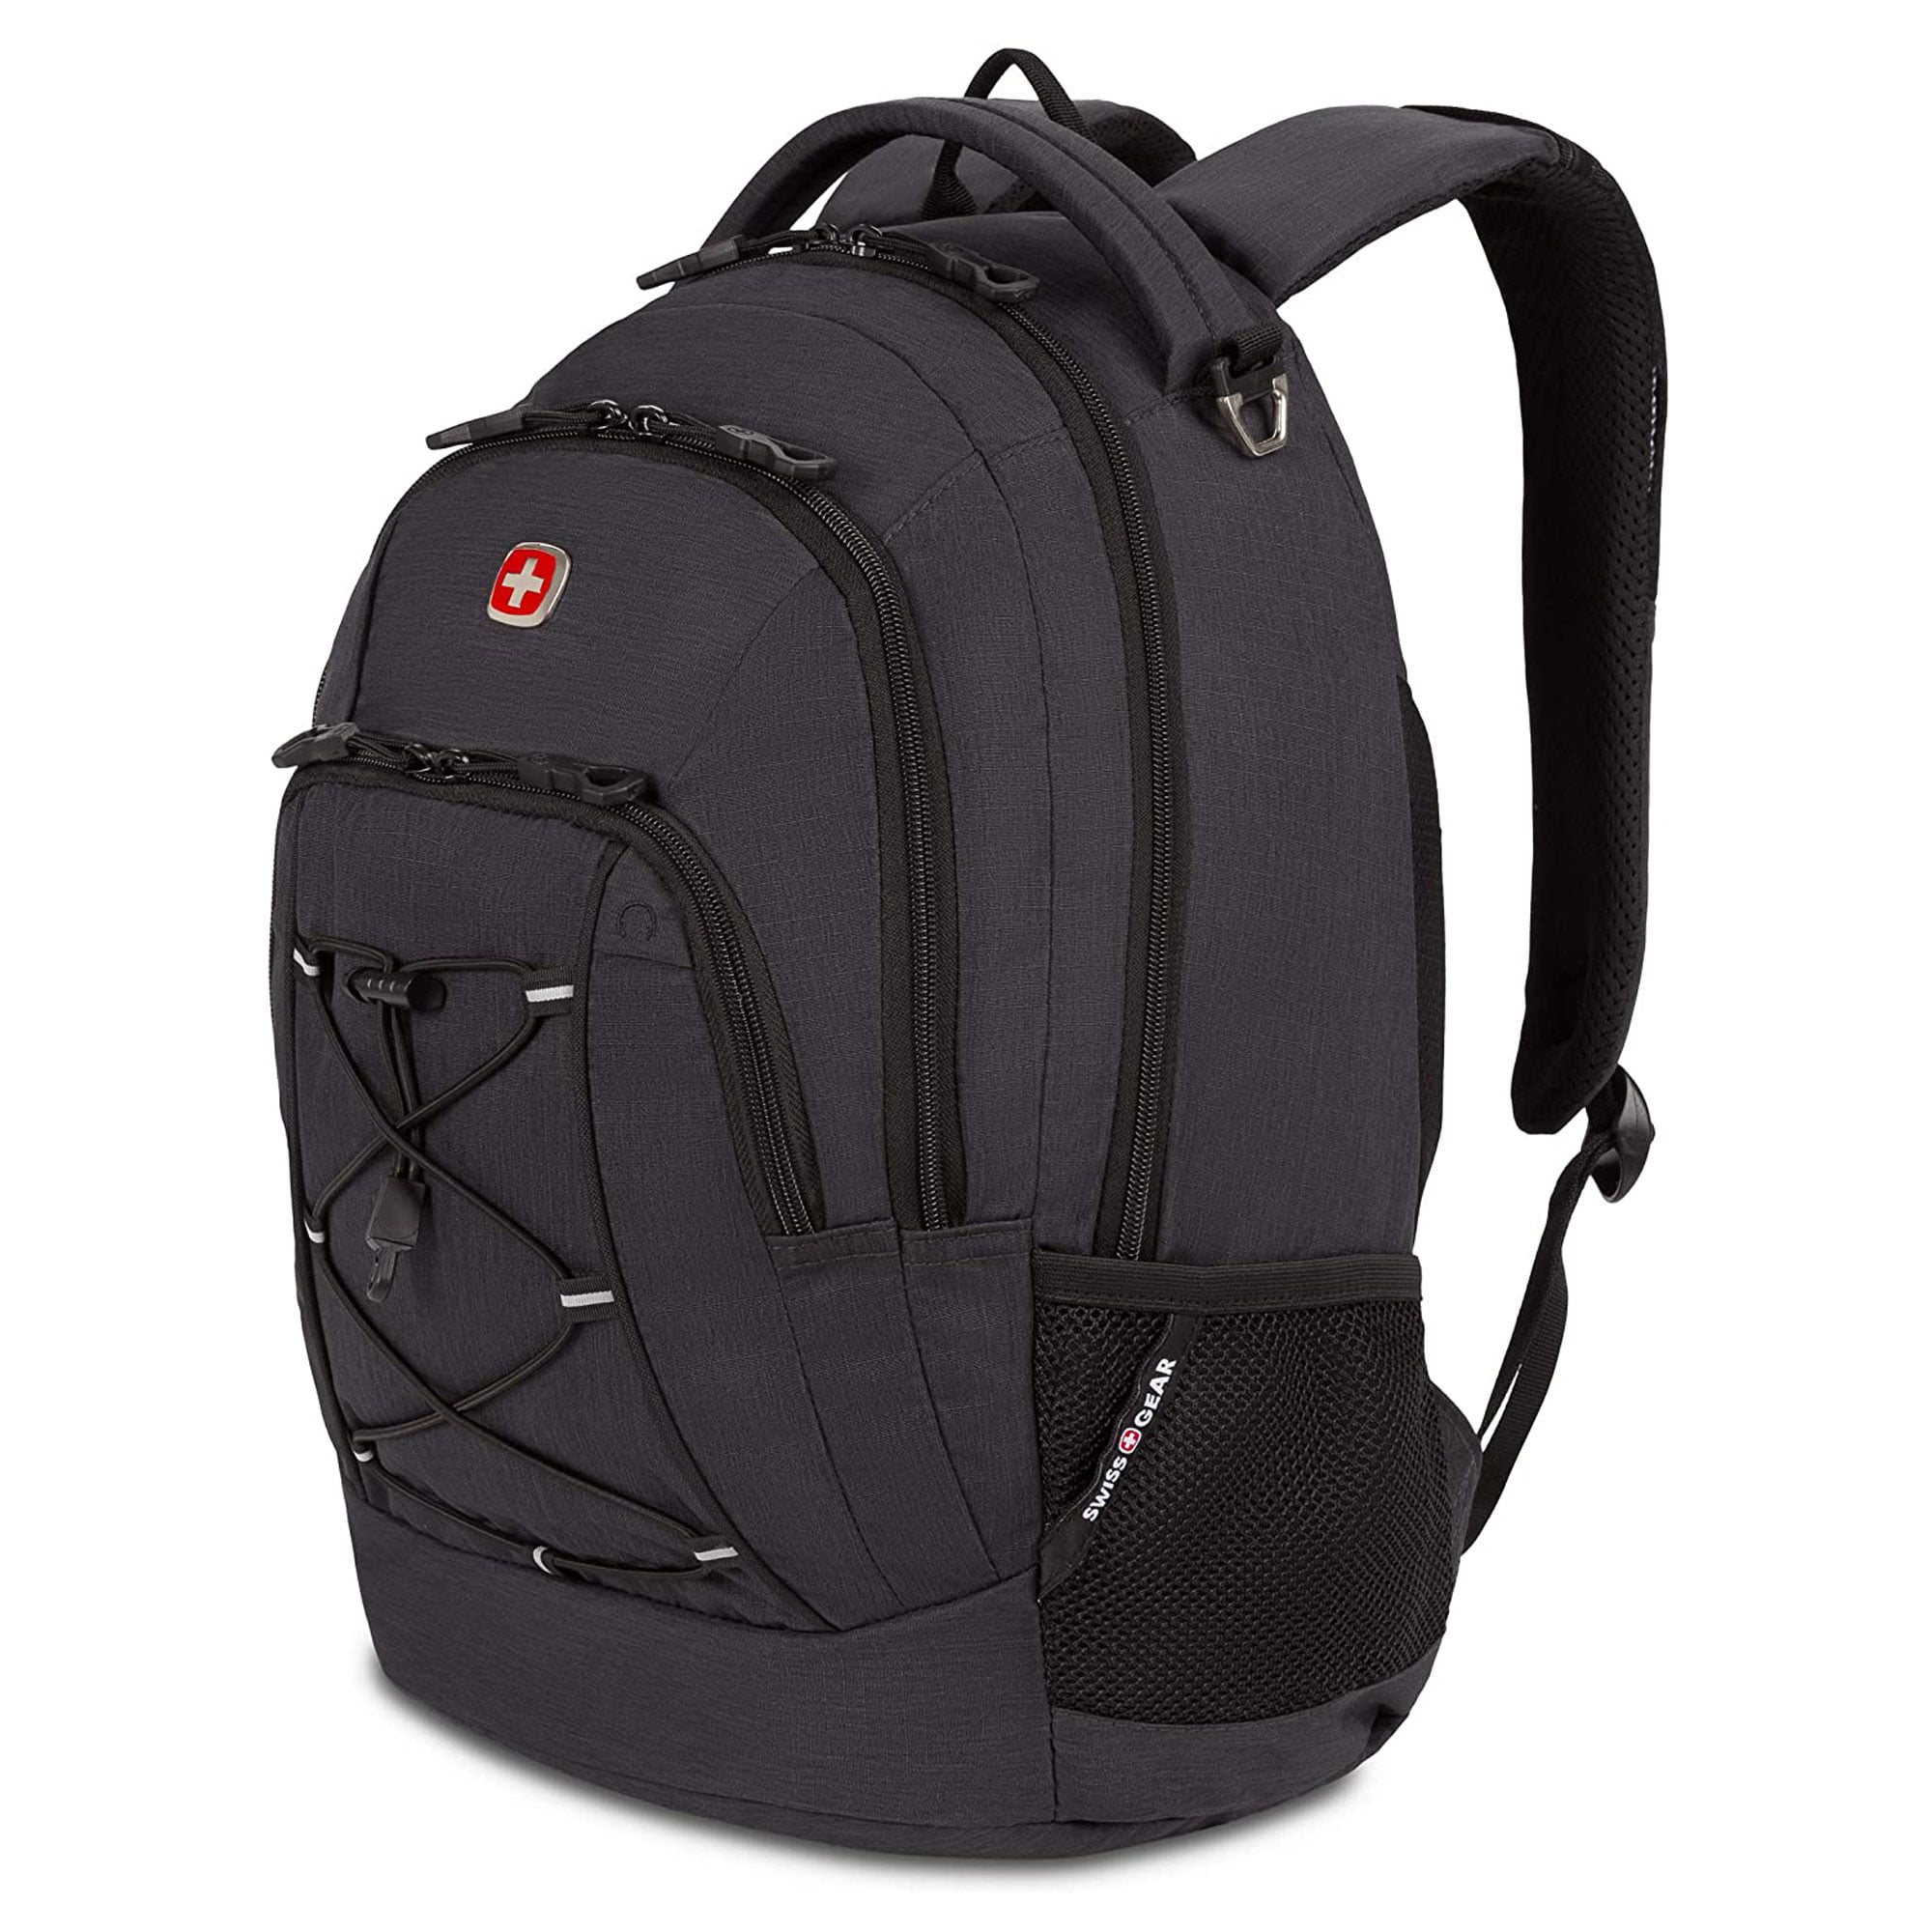 Ideal for Commuting Black Cod Special Edition SwissGear Laptop Backpack with Shoulder Straps Travel Work and School College